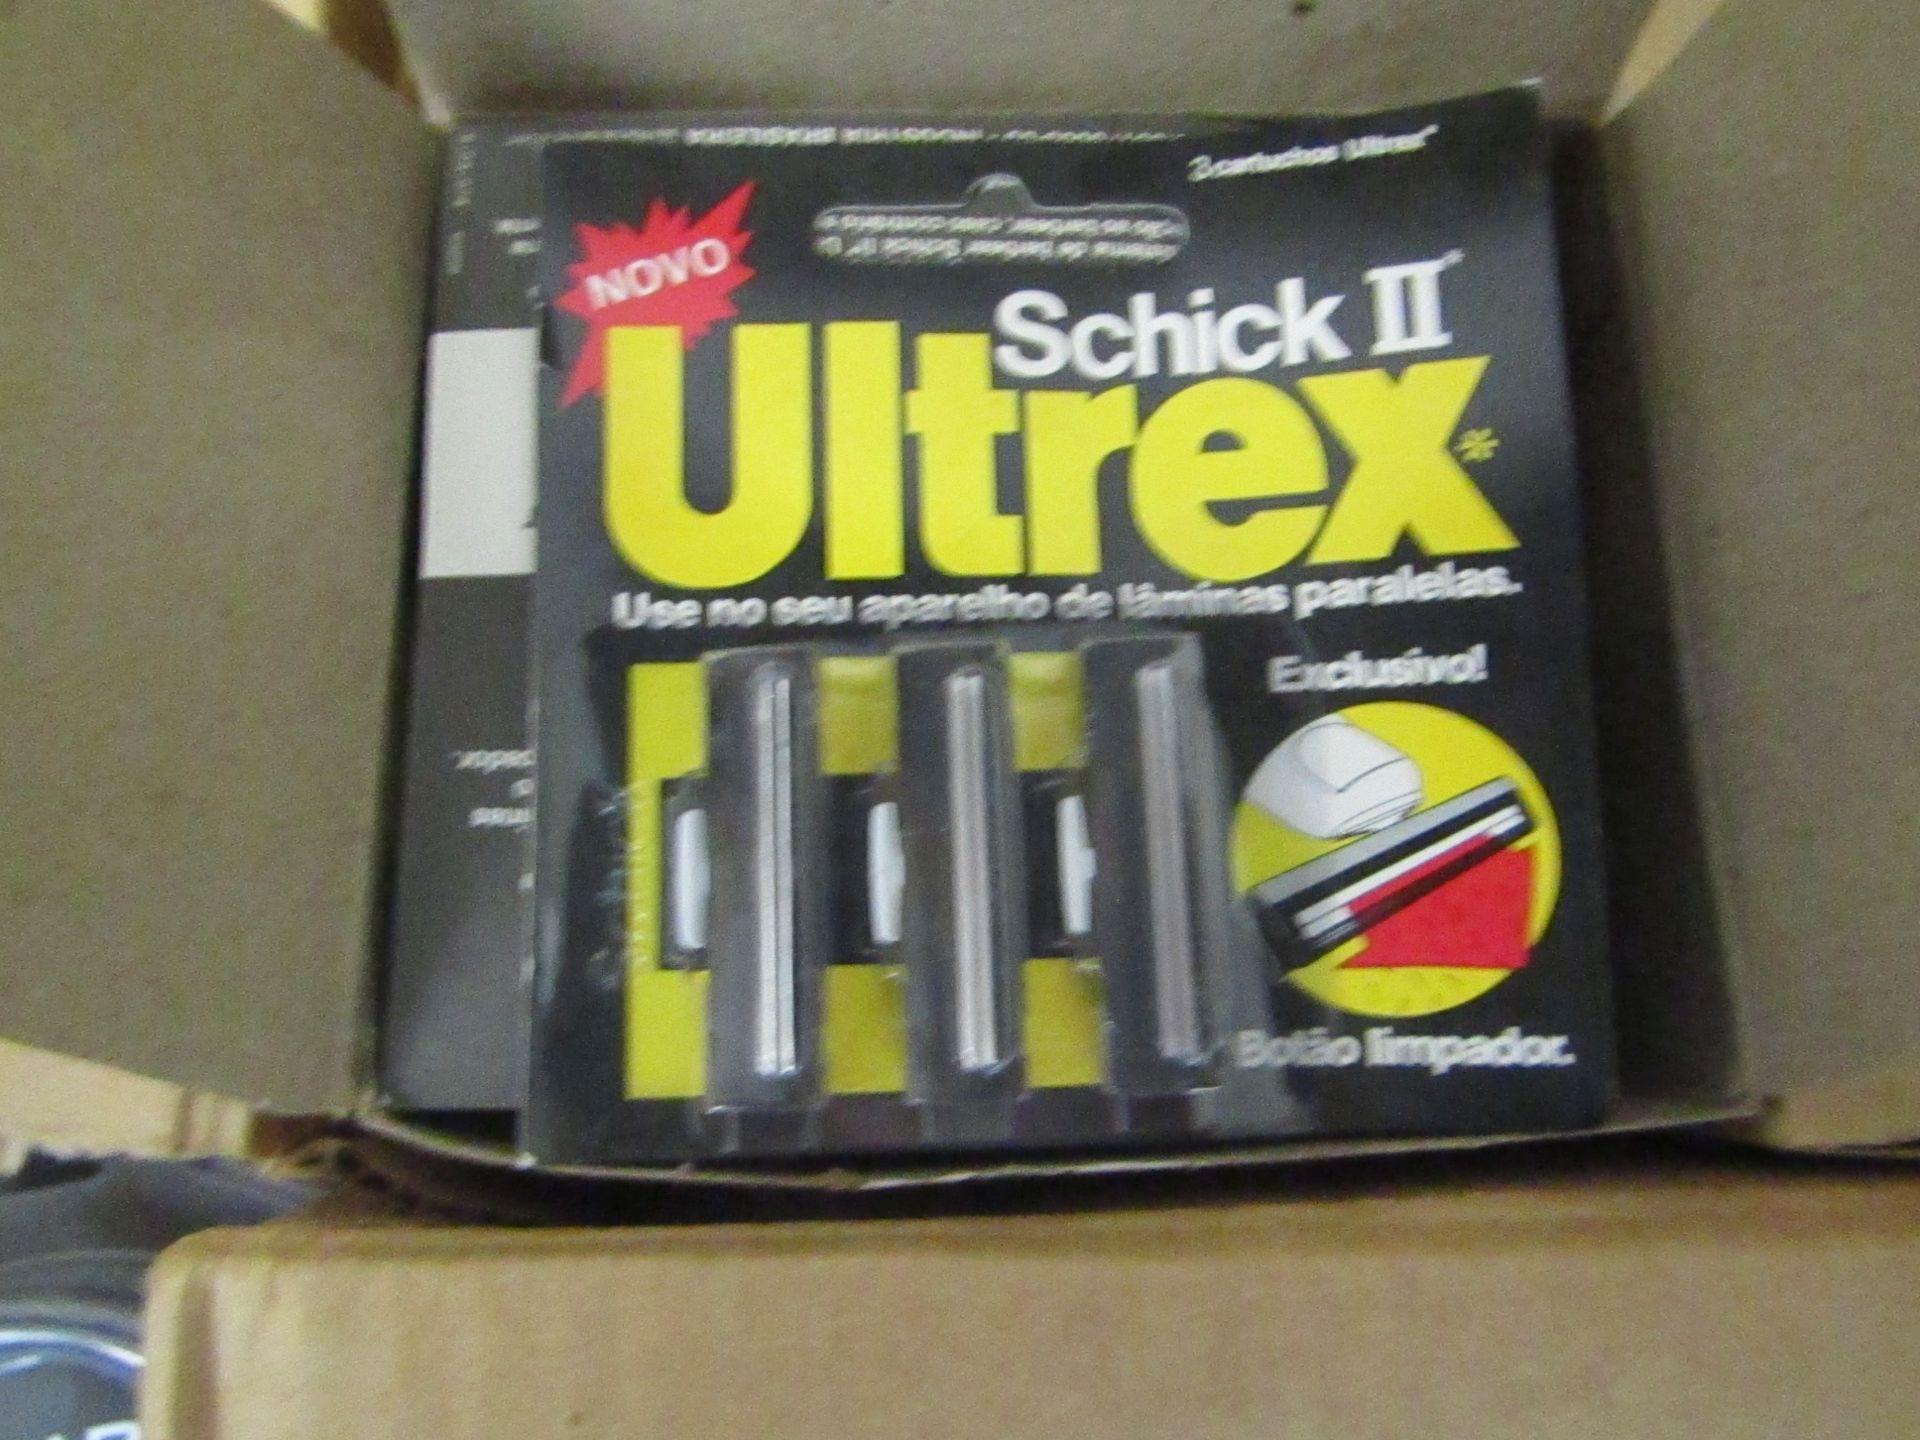 1 x Boxes of 24 x Ultrex replacement Razor blades, New and still sealed